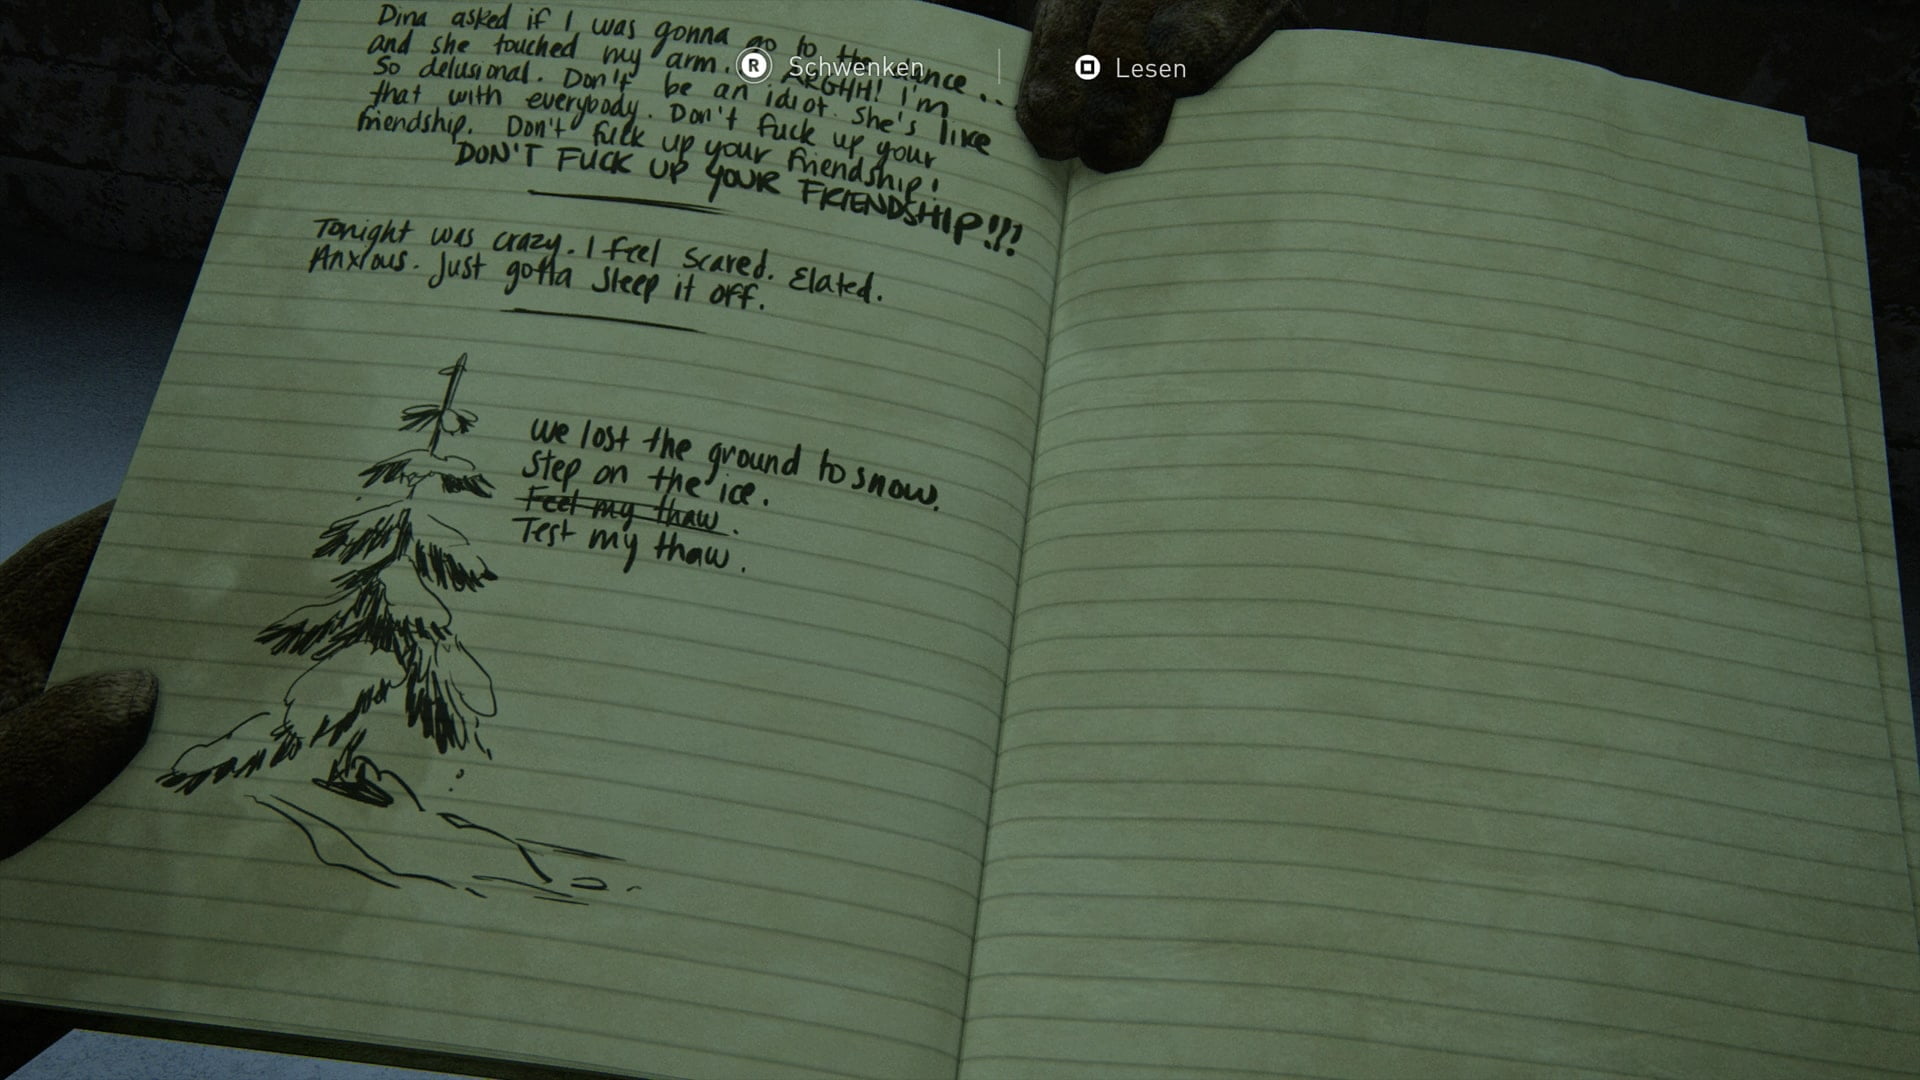 The Last of Us 2 Journal Entry Locations